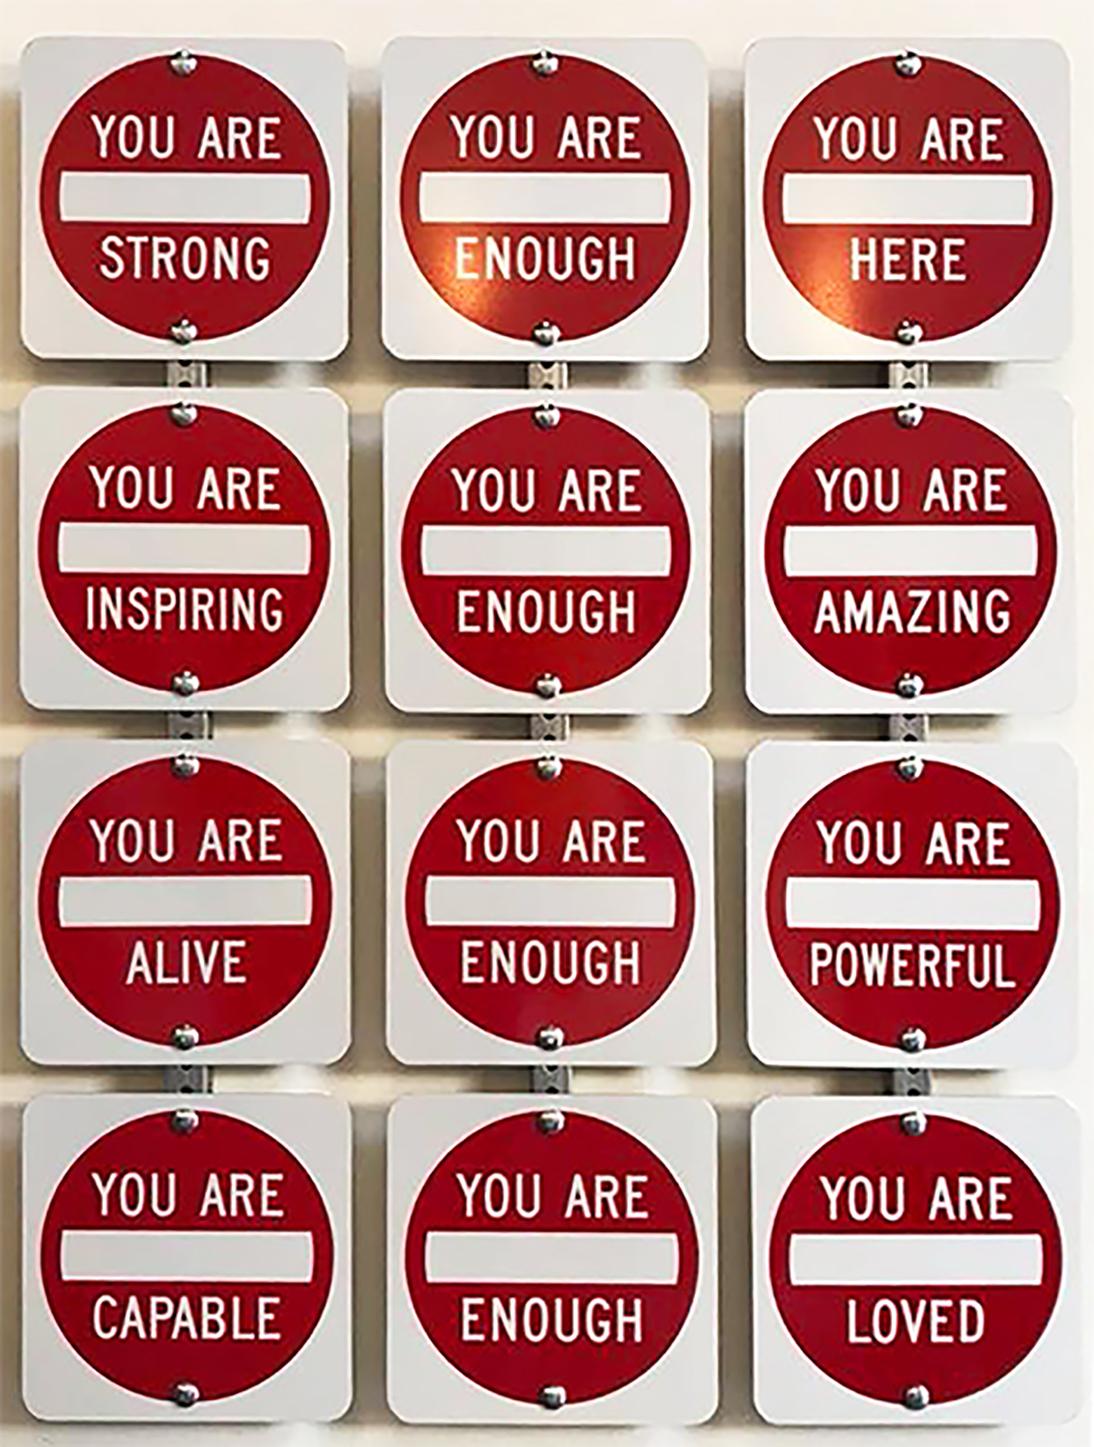 "You Are ...." Contemporary Street Sign Sculpture - Mixed Media Art by Scott Froschauer